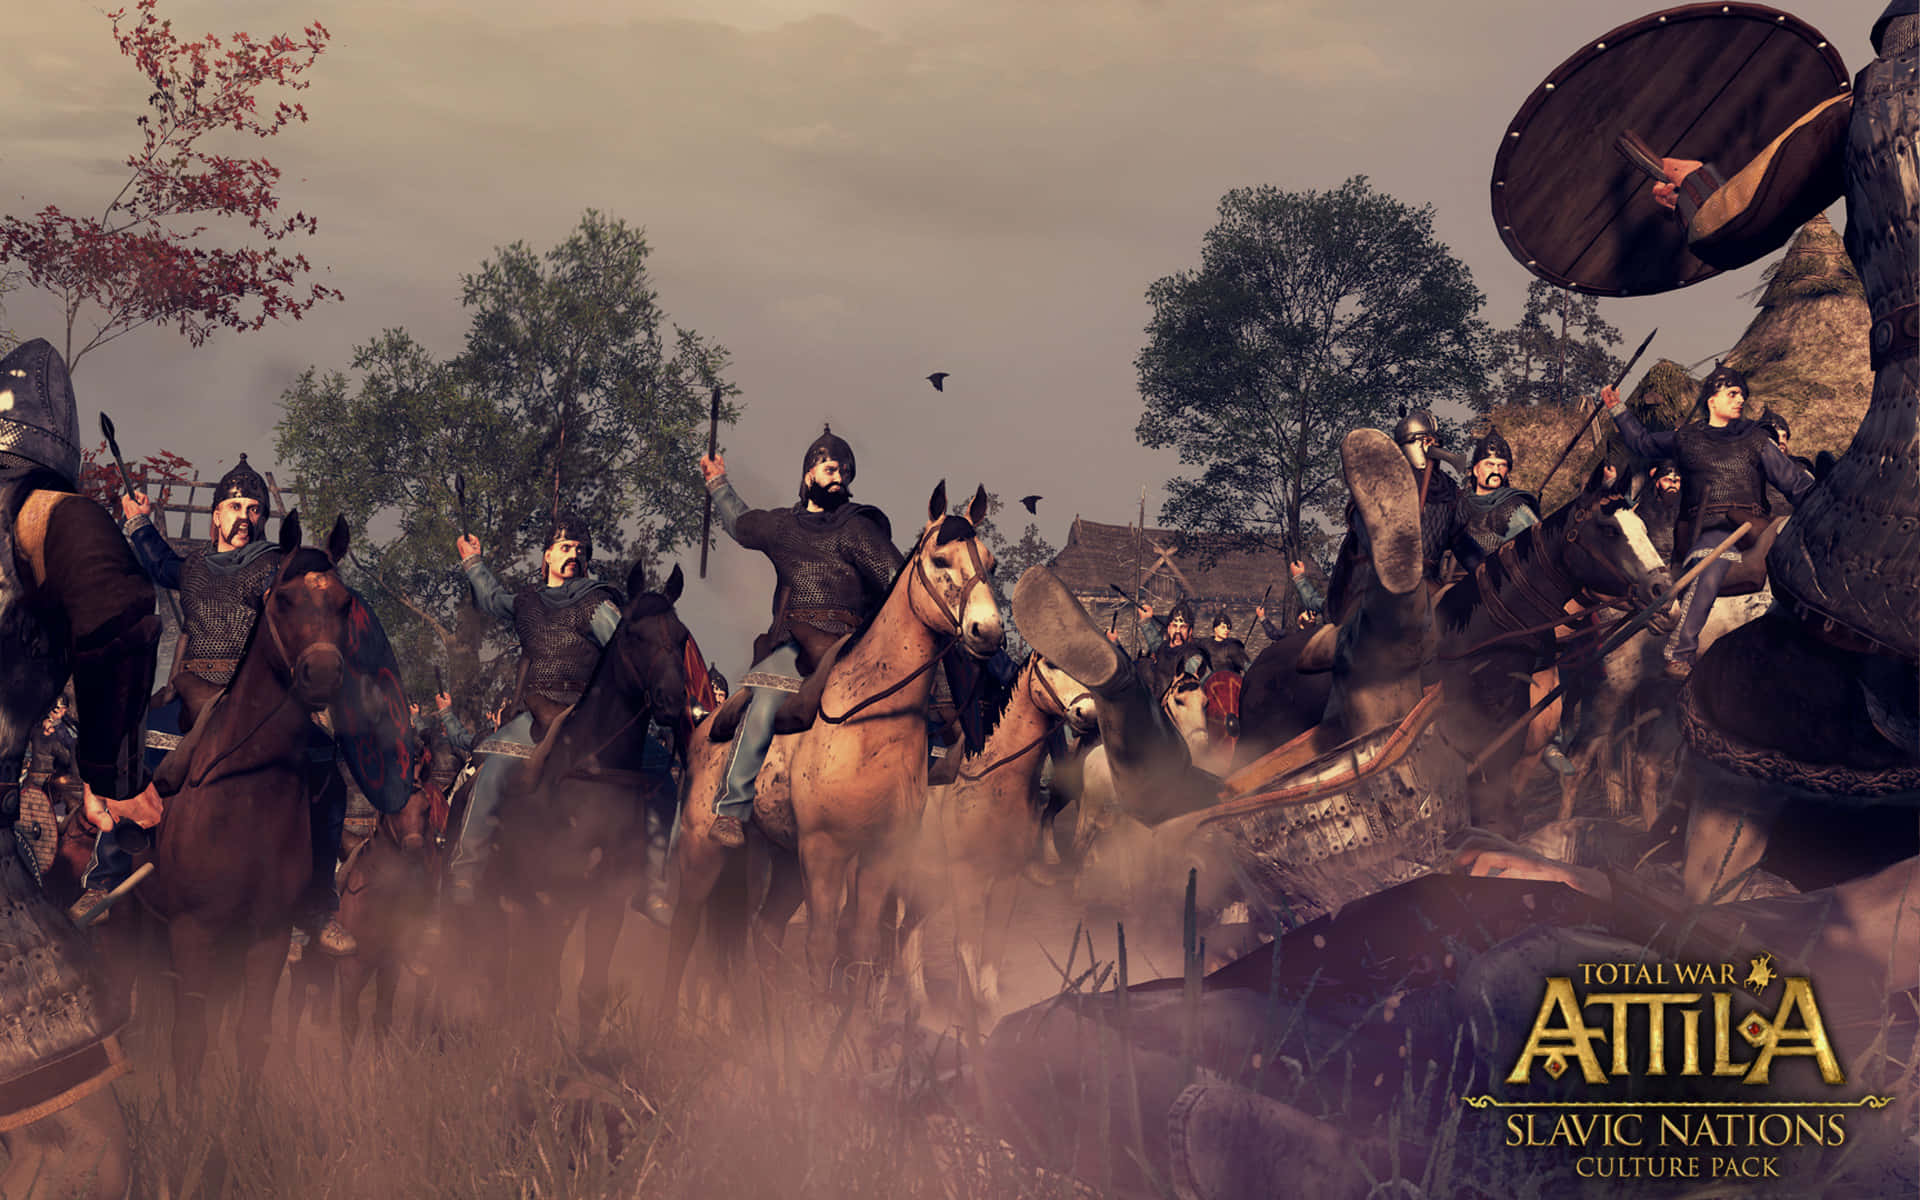 Explore the Ancient World with Total War Attila